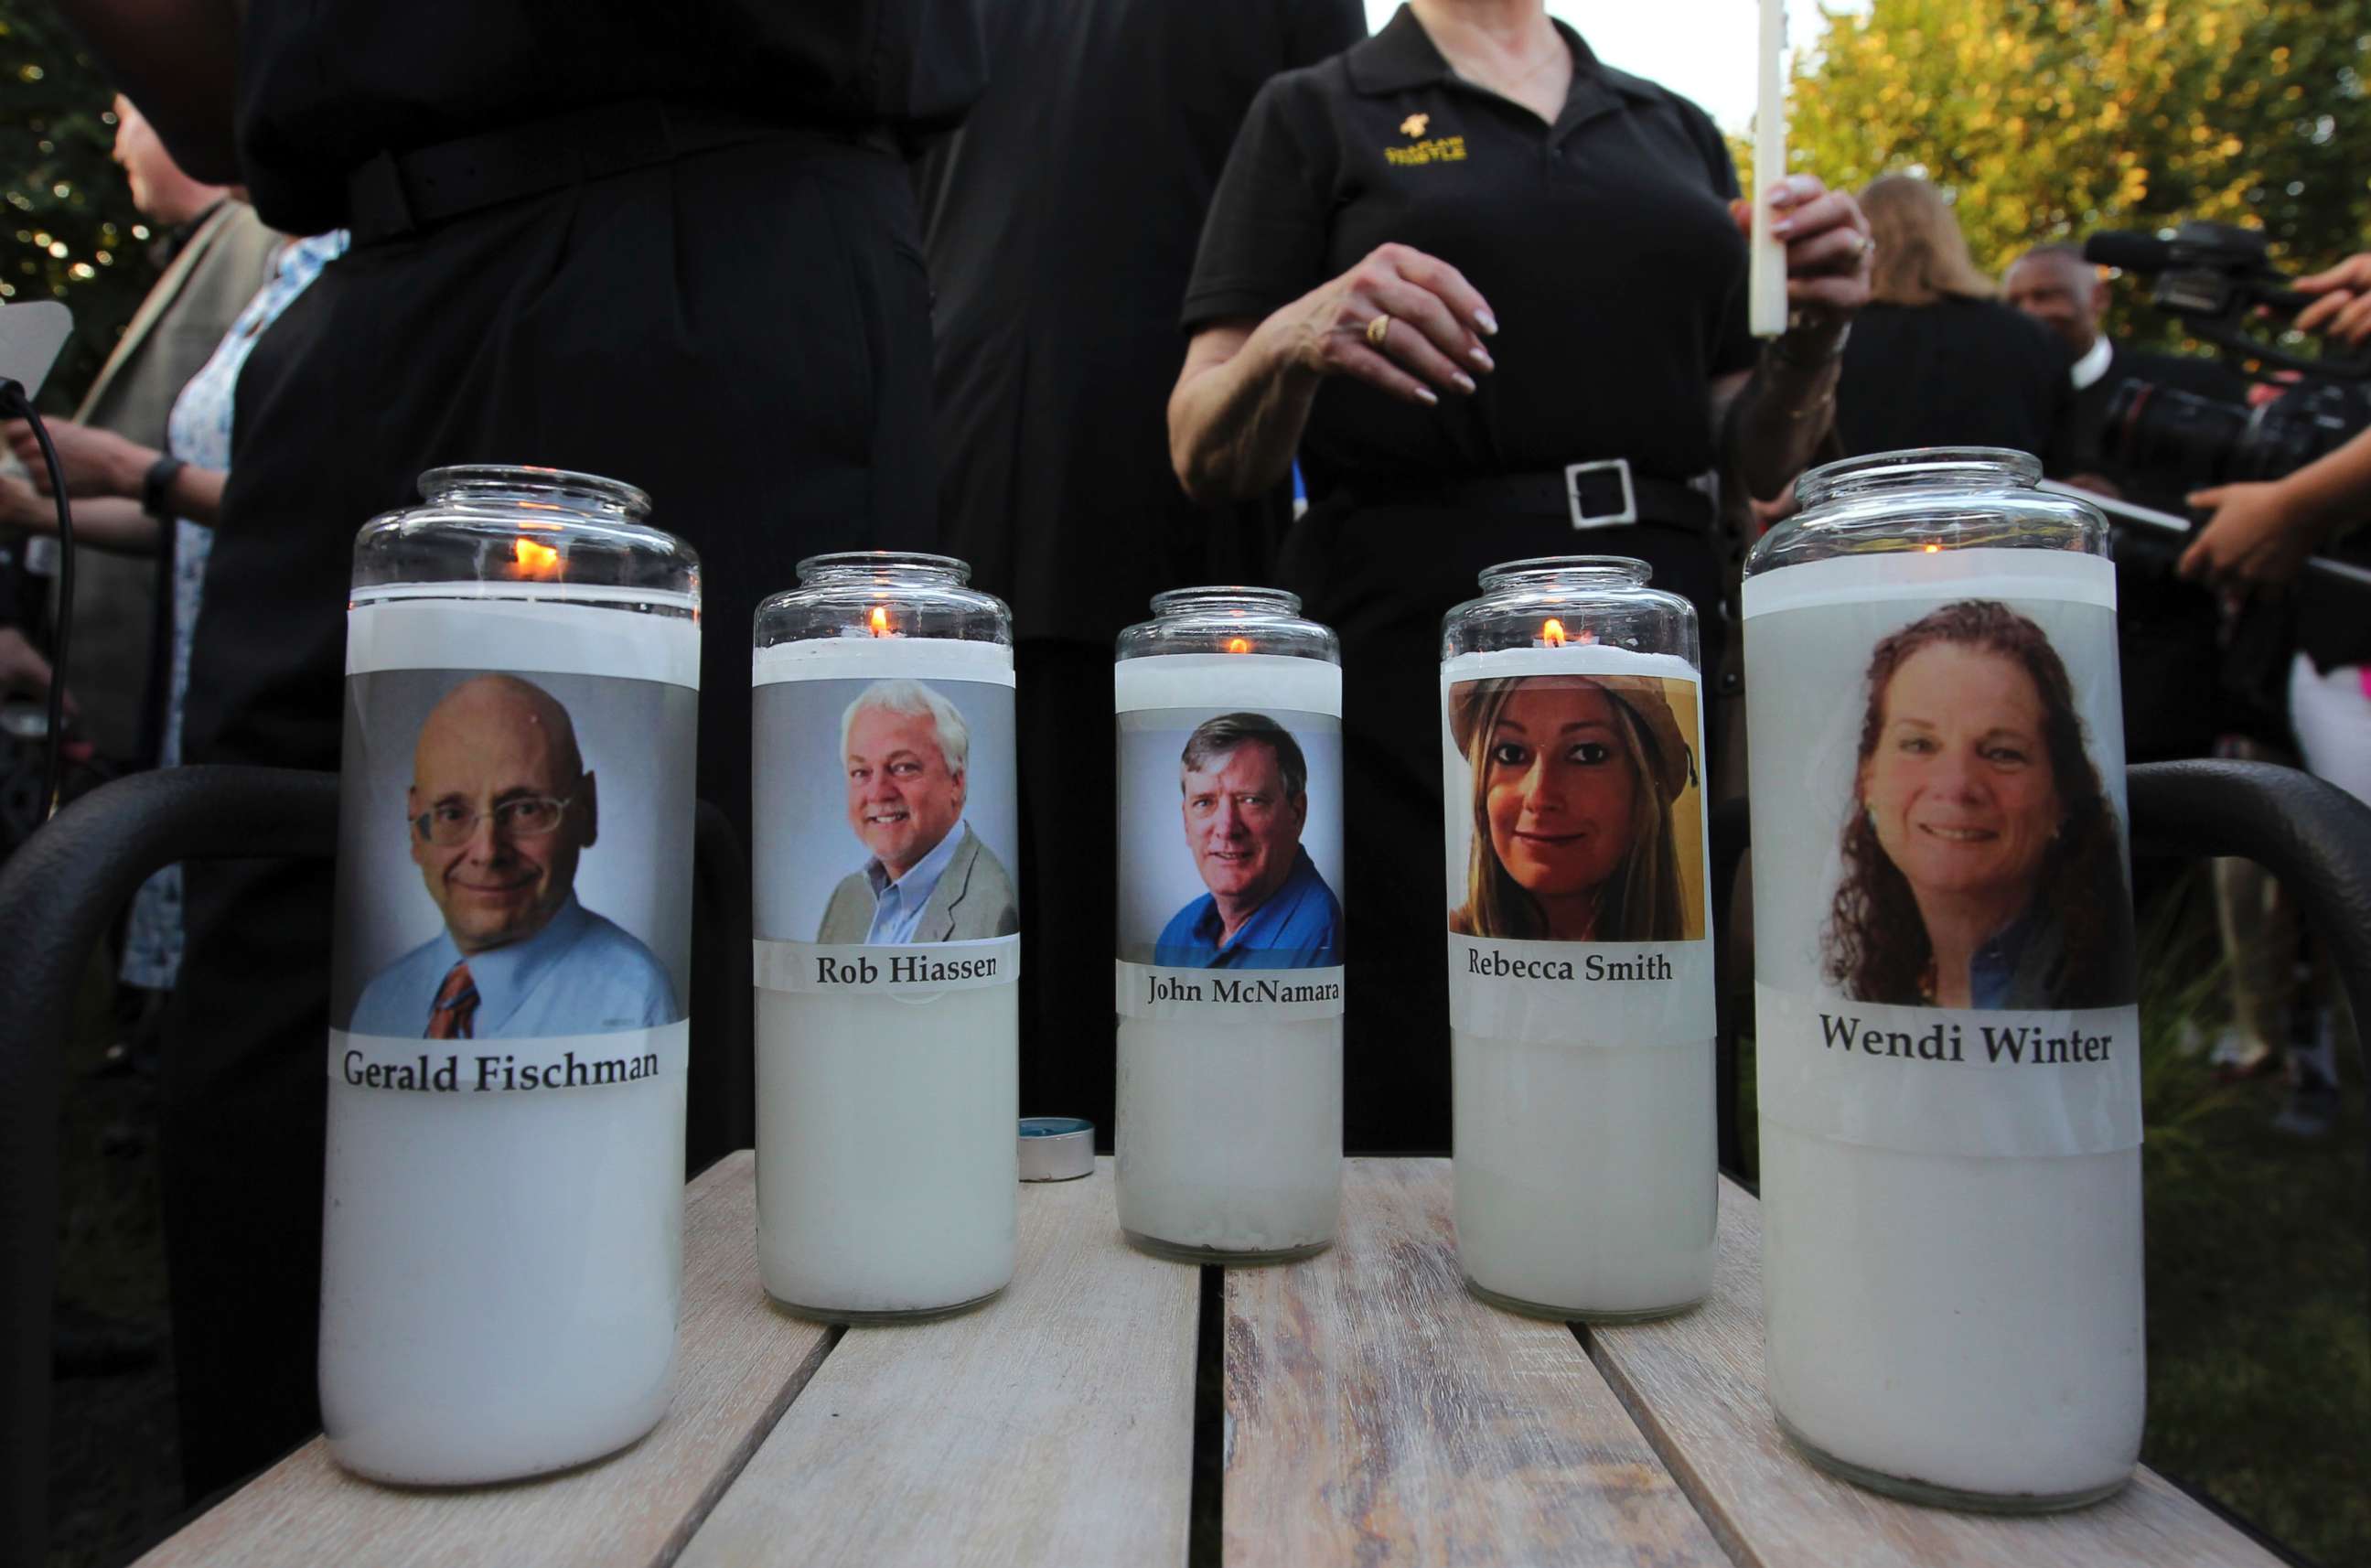 PHOTO: Photos of five journalists adorn candles during a vigil across the street from where they were slain in their newsroom in Annapolis, Md., June 29, 2018.